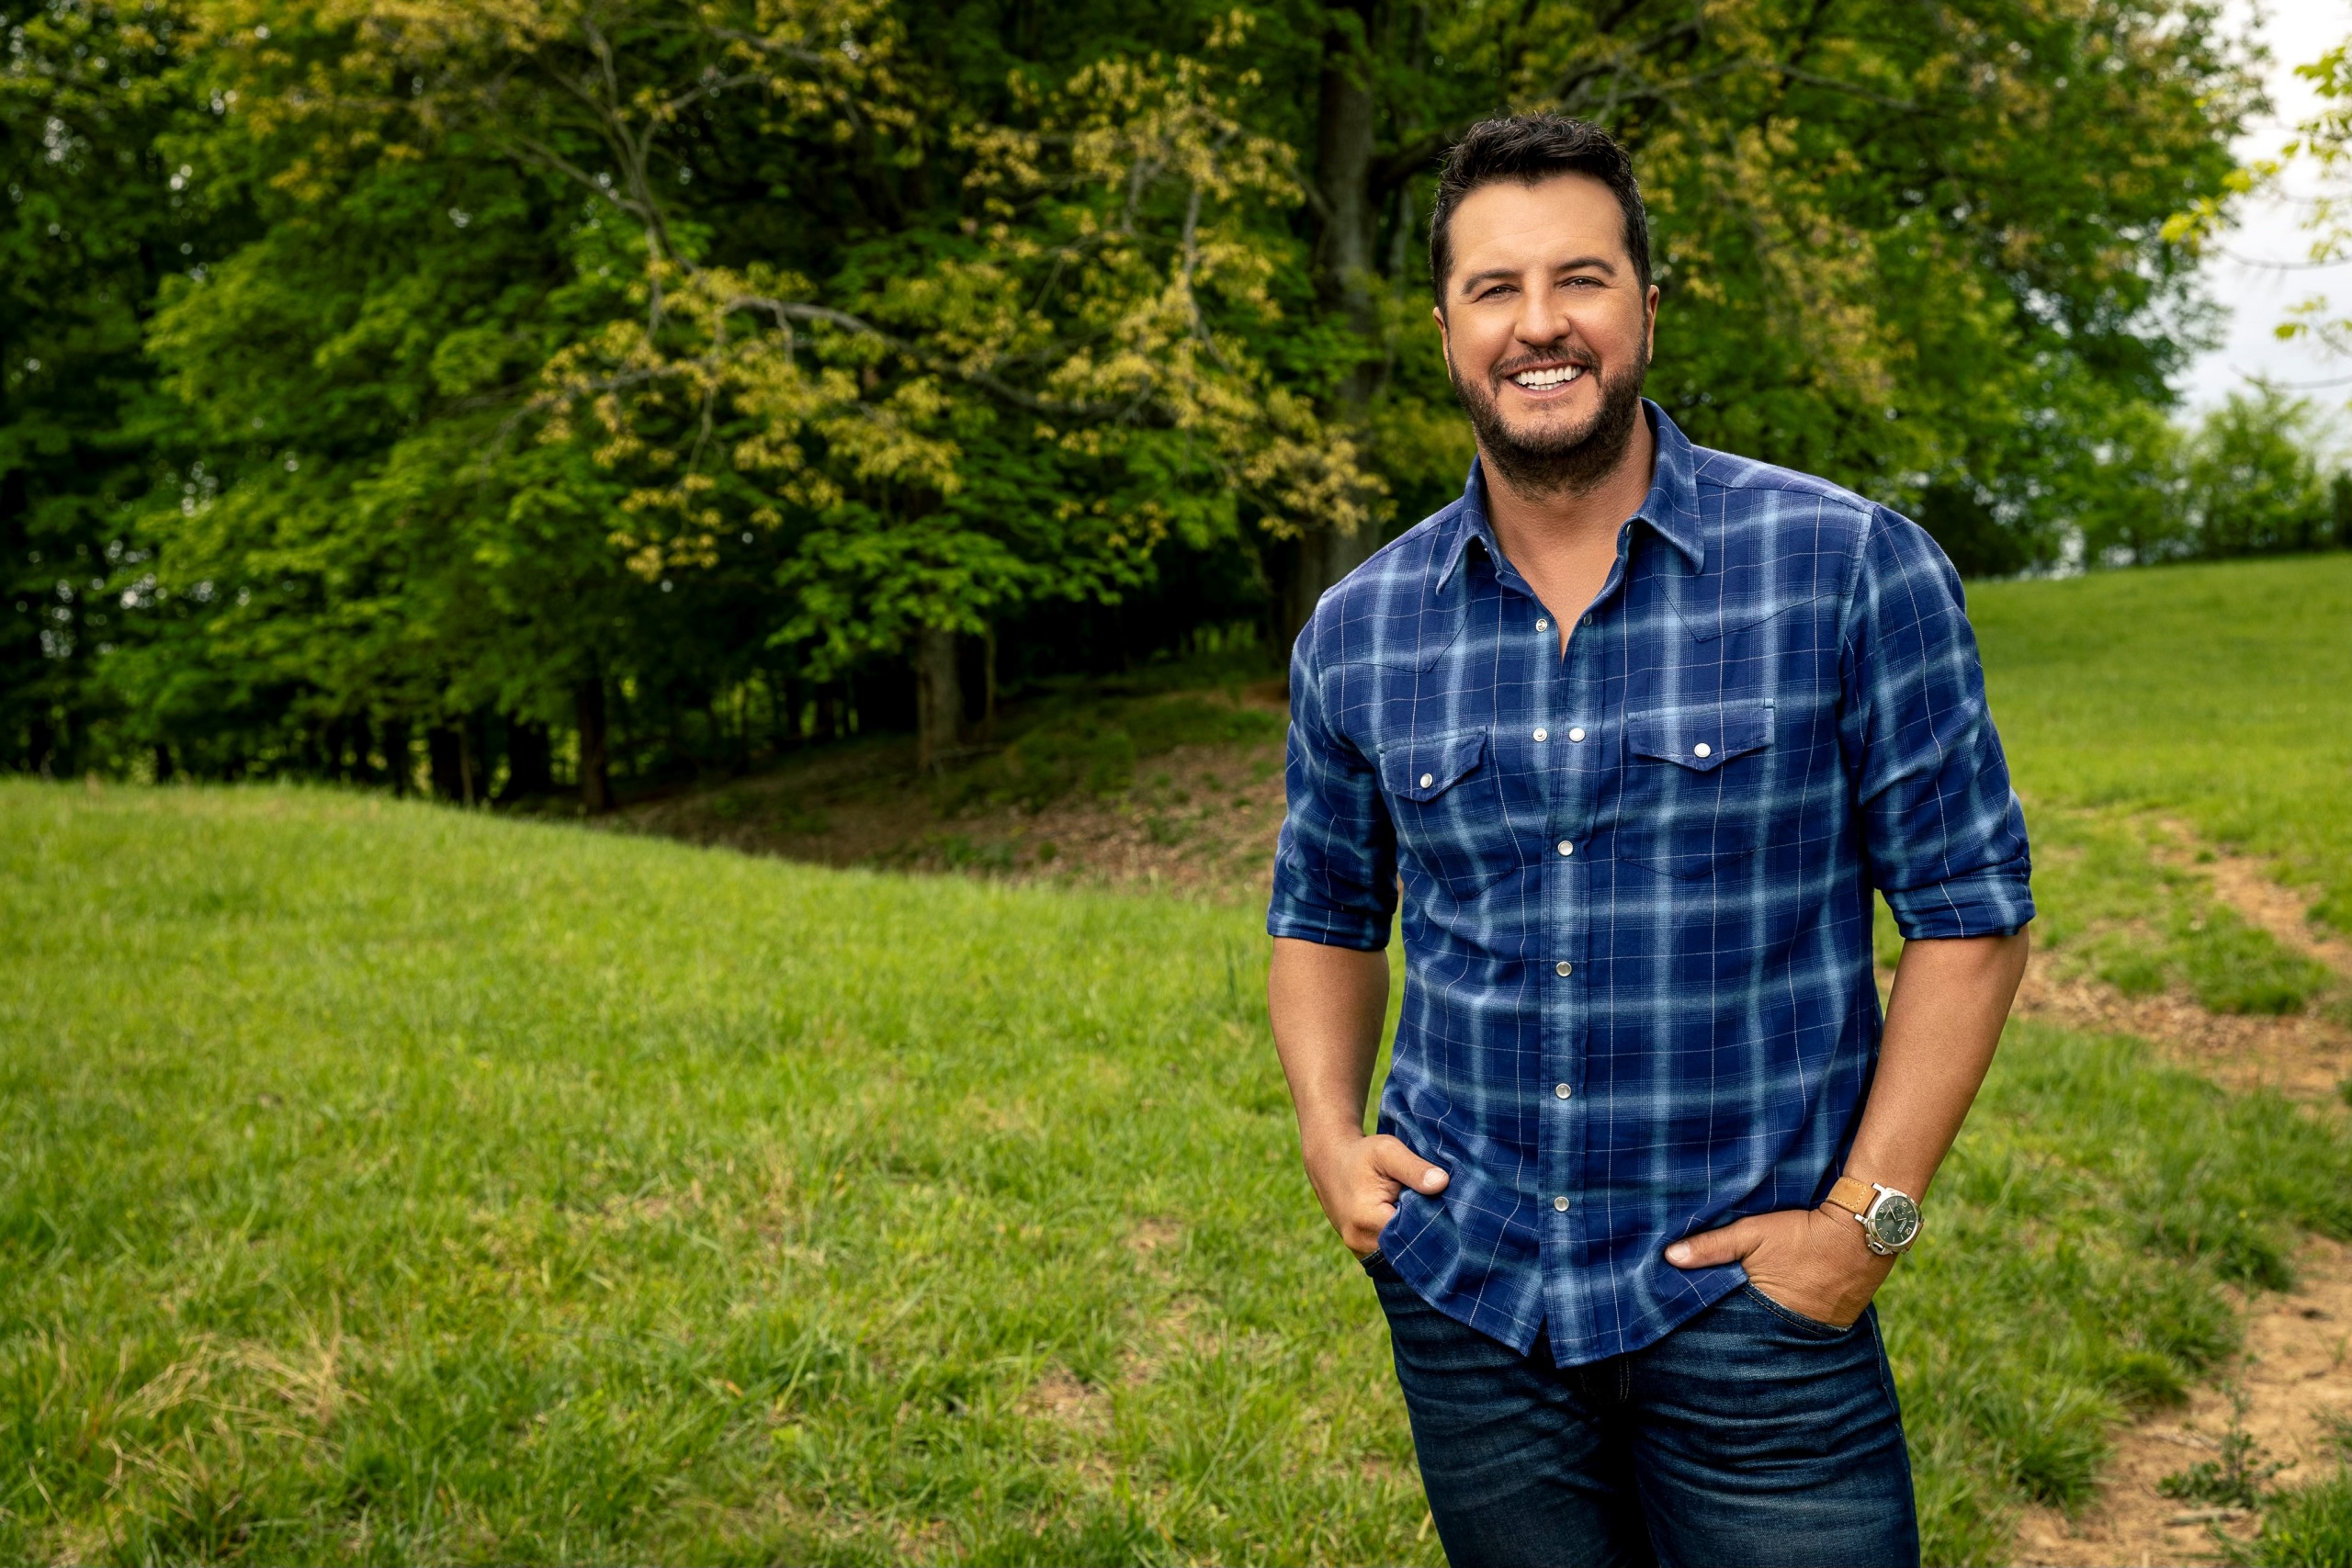 LUKE BRYAN AND AMERICAN IDOL WILL SAY GOODBYE TO KATY PERRY DURING SUNDAY’S FINALE.